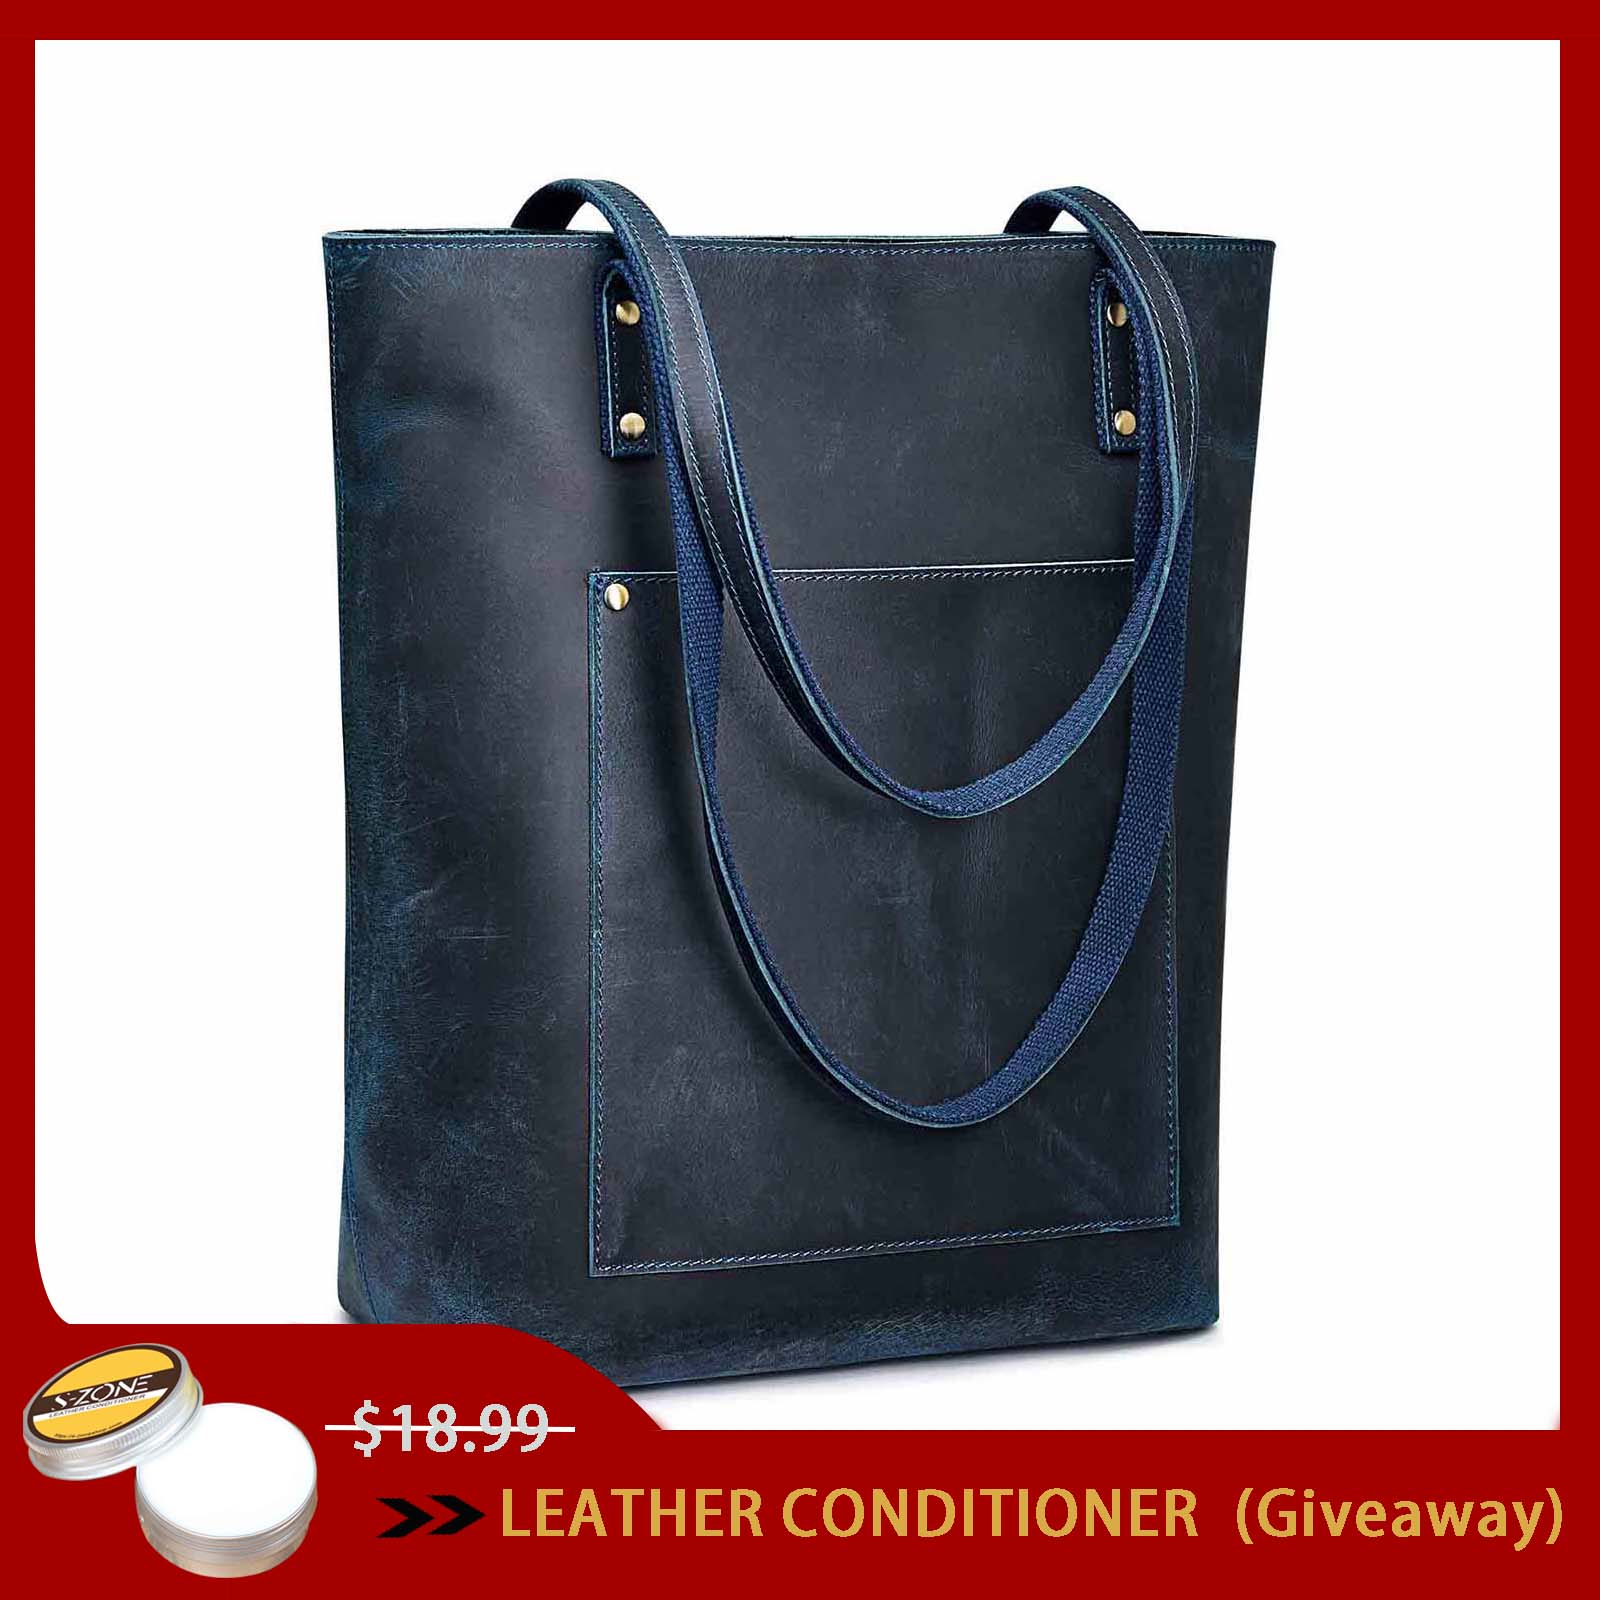 Genuine Leather Tote Bag with Front Pocket